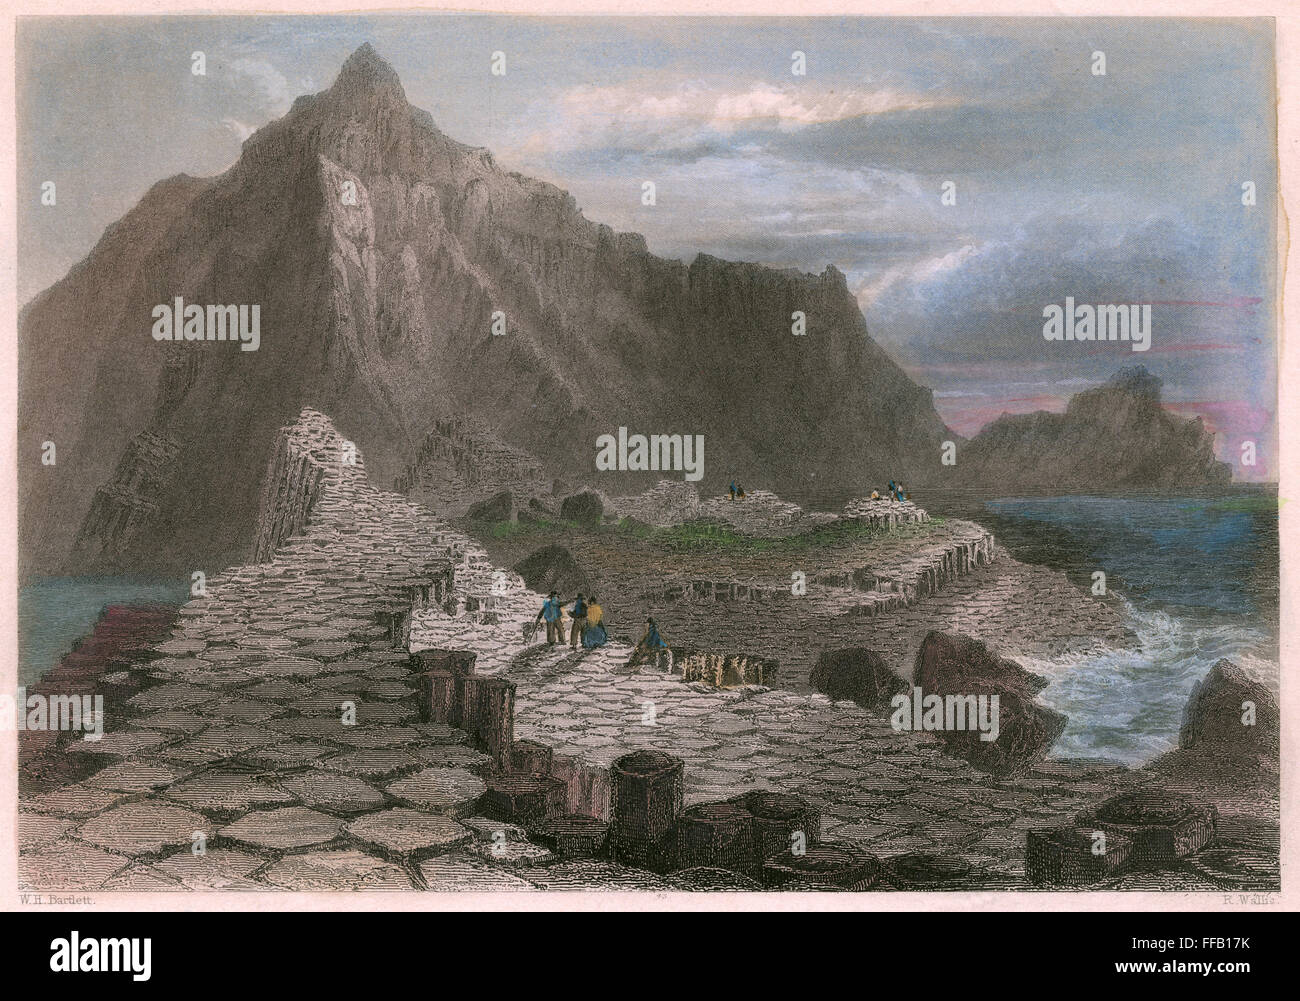 IRELAND: GIANT'S CAUSEWAY. /nThe Giant's Causeway in County Antrim, Northern Ireland. Steel engraving, c1840, after William Henry Bartlett. Stock Photo